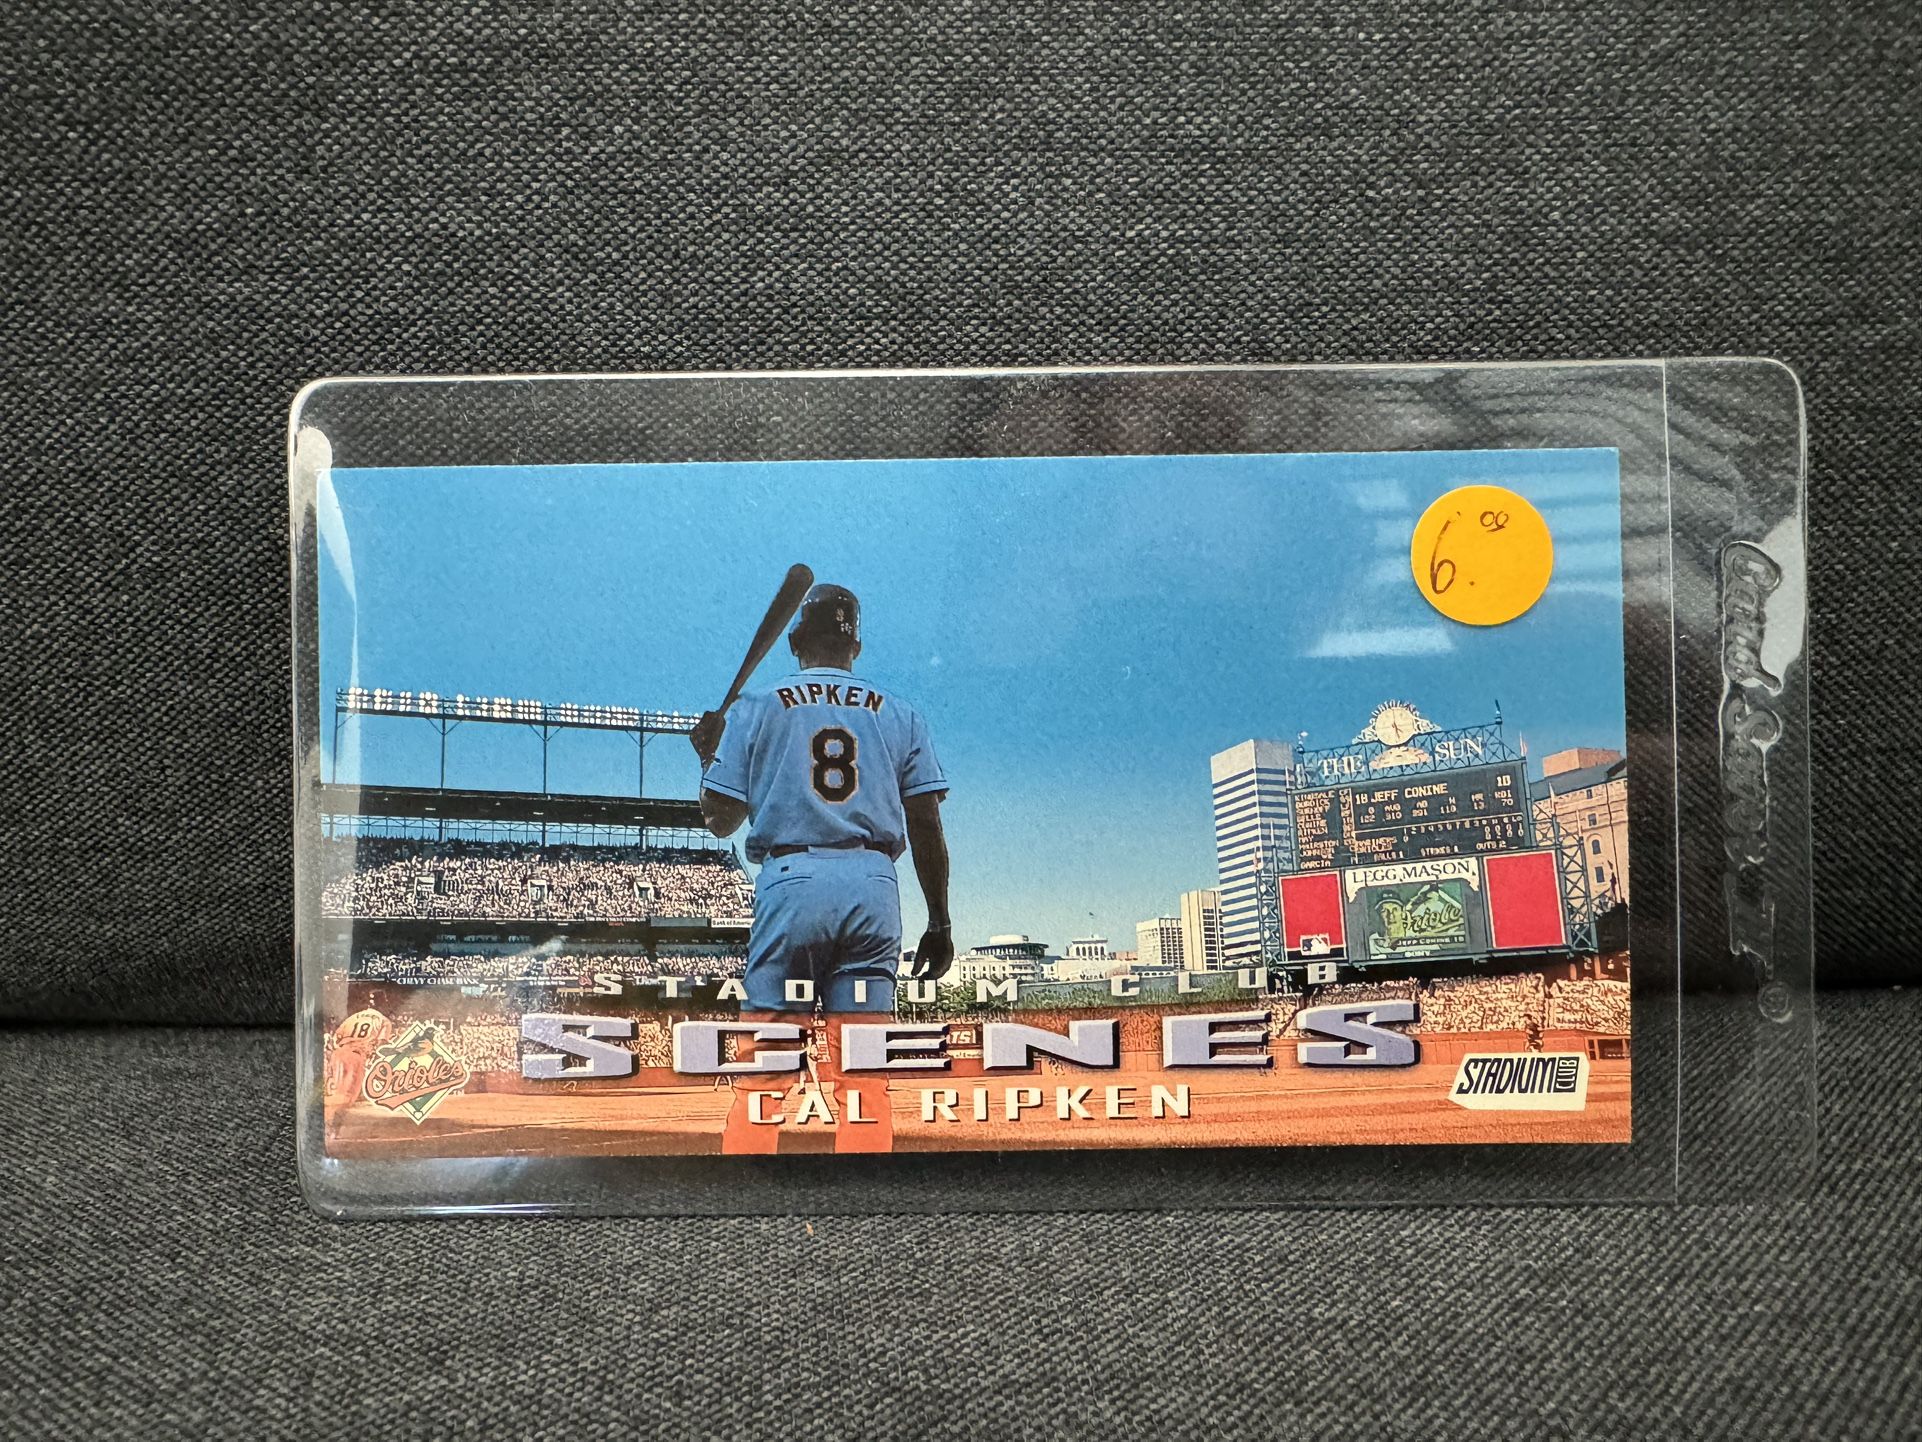 Topps 1999 Action Flats Baseball Card/Figure- 3 and all new in original boxes! 